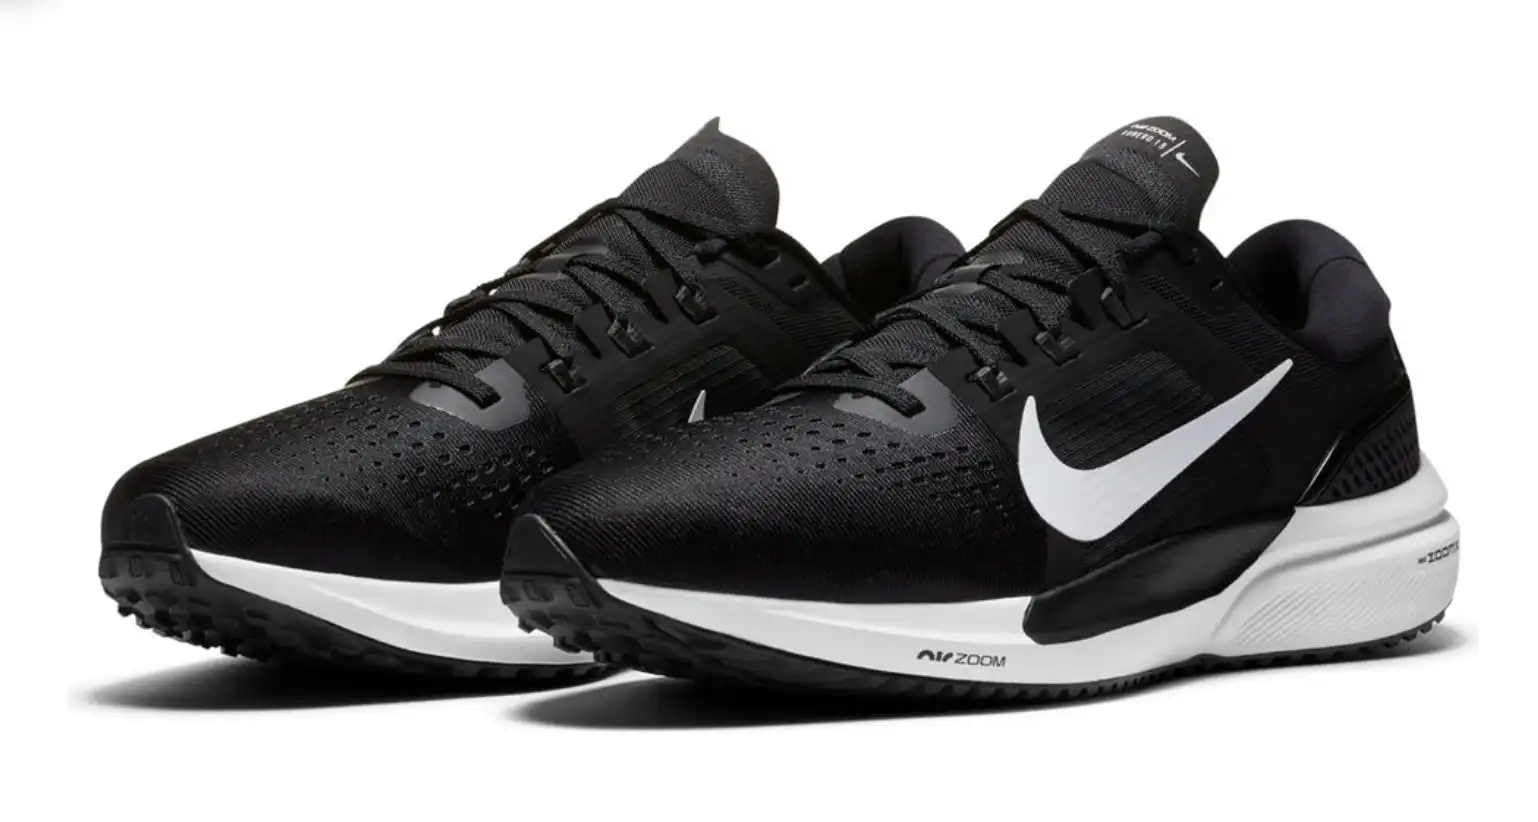 Nike Mens Air Zoom Vomero 15 Running Shoes Training Low Top Sneaker - Black/White